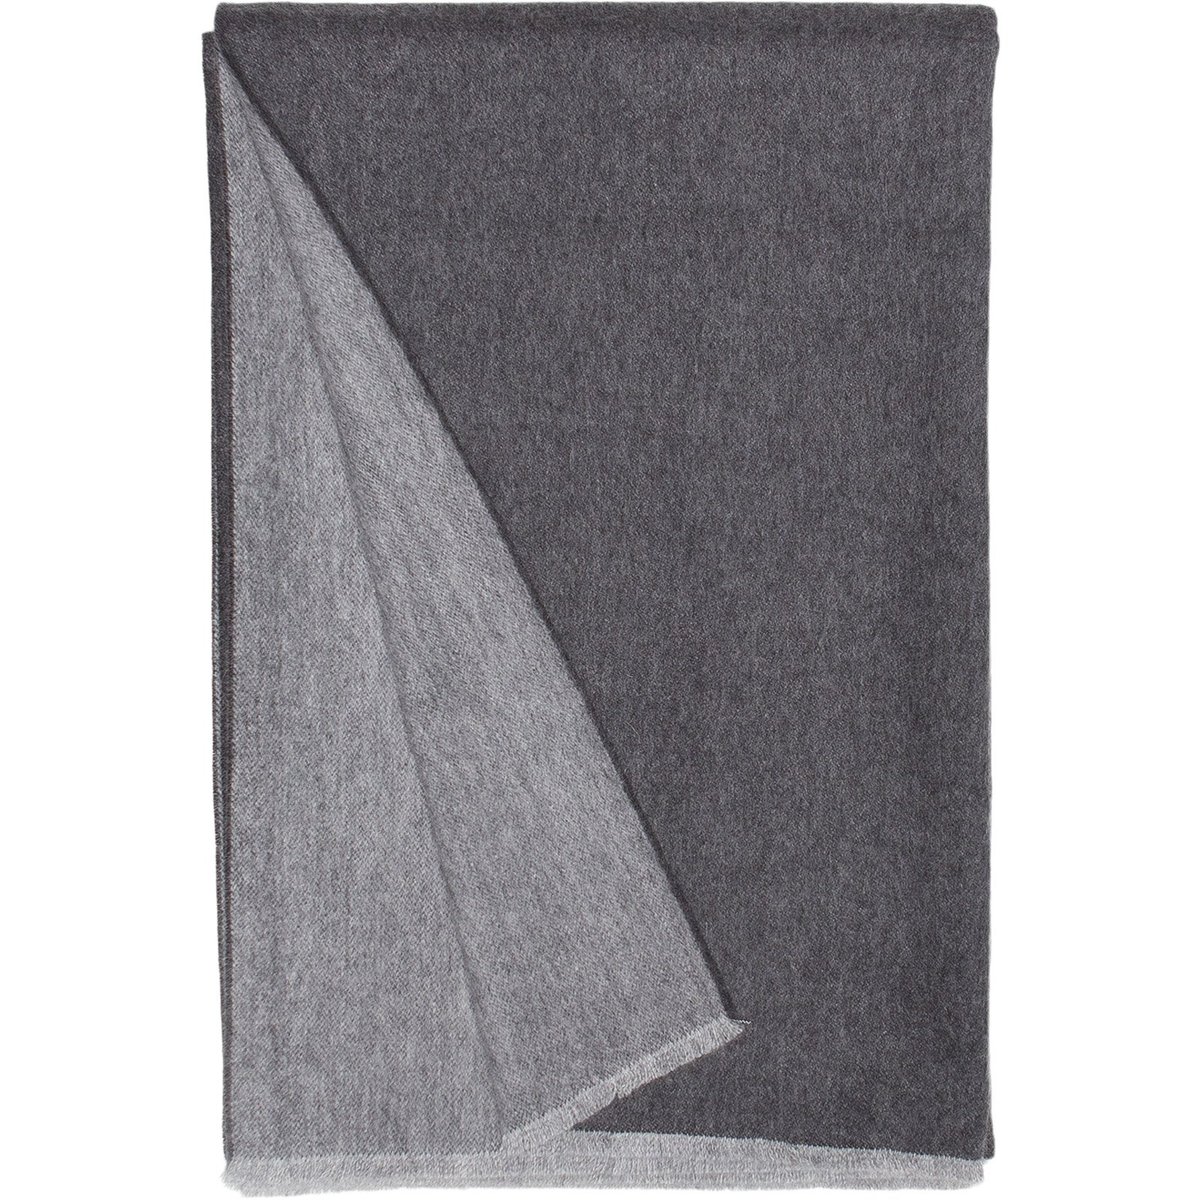 Charcoal Grey Vale Reversible Throw